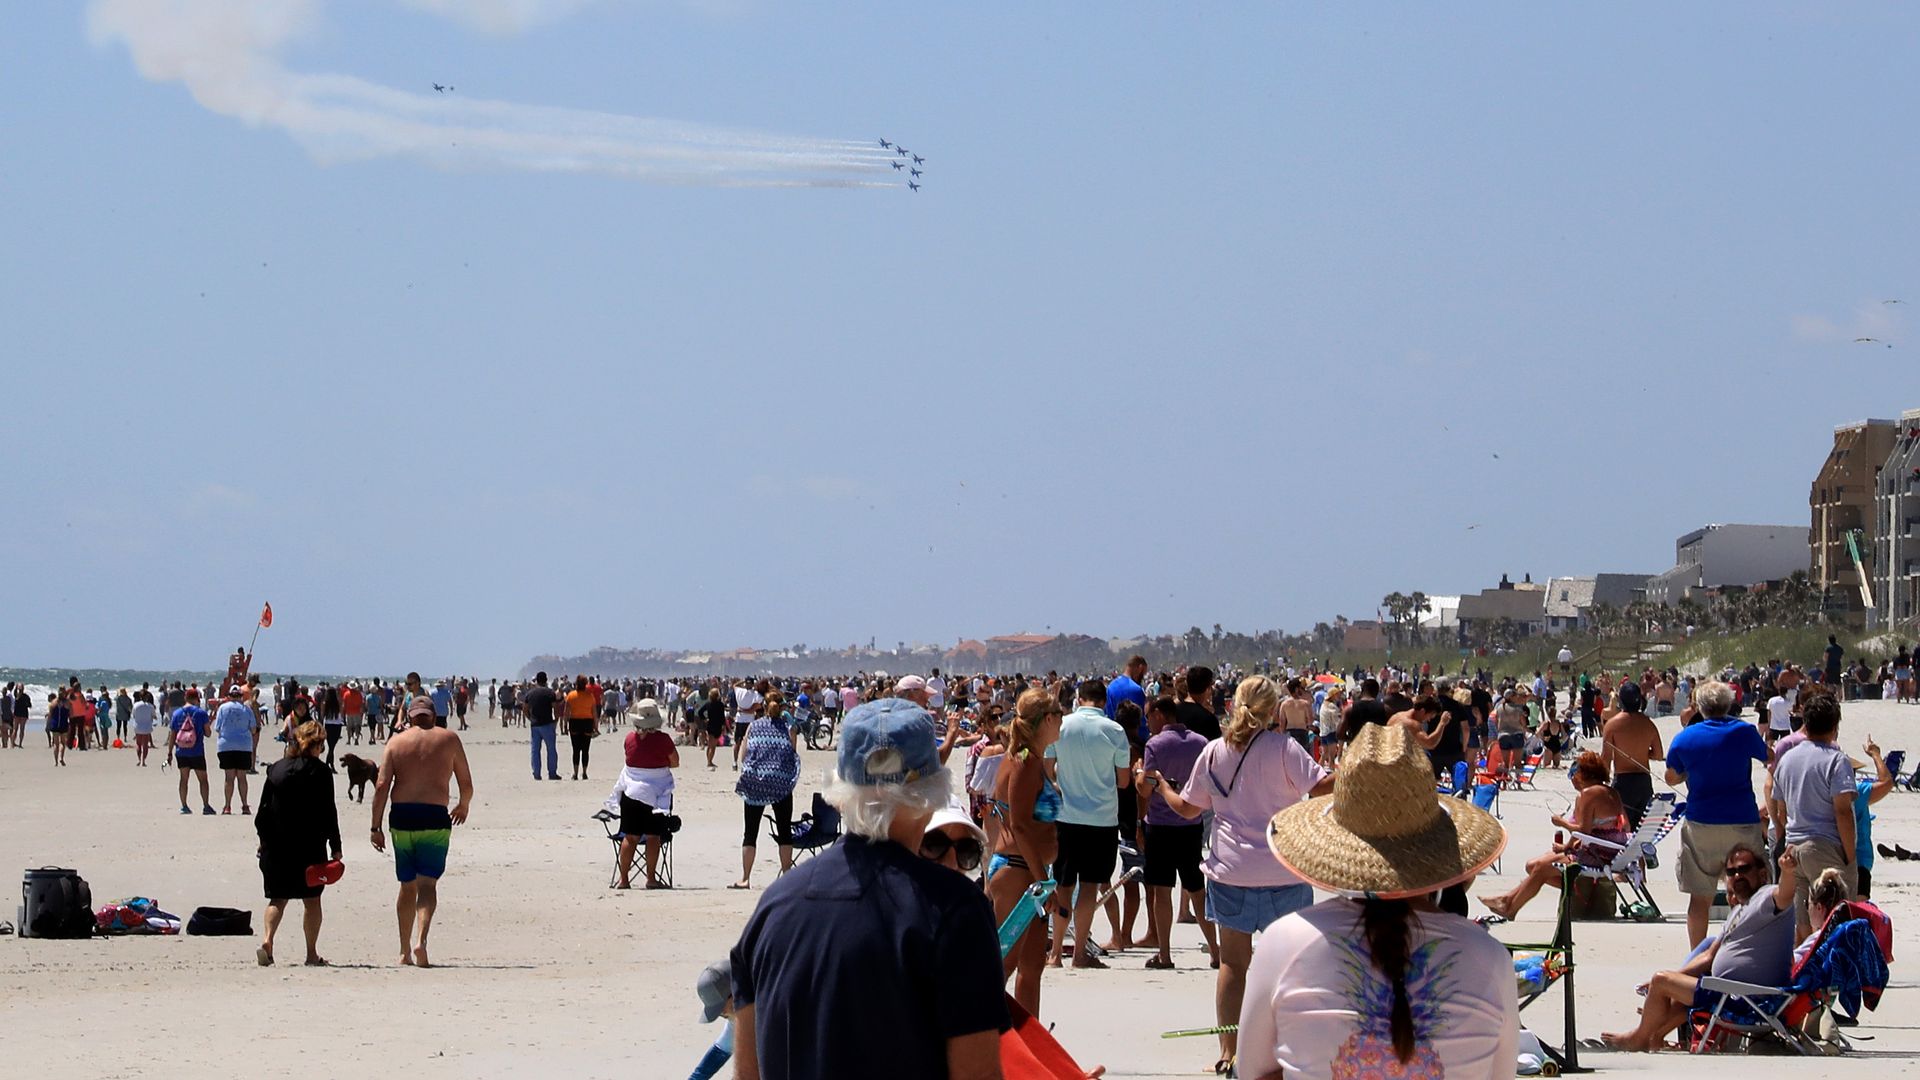 A crowd on a beach watches the Blue Angels fly overhead